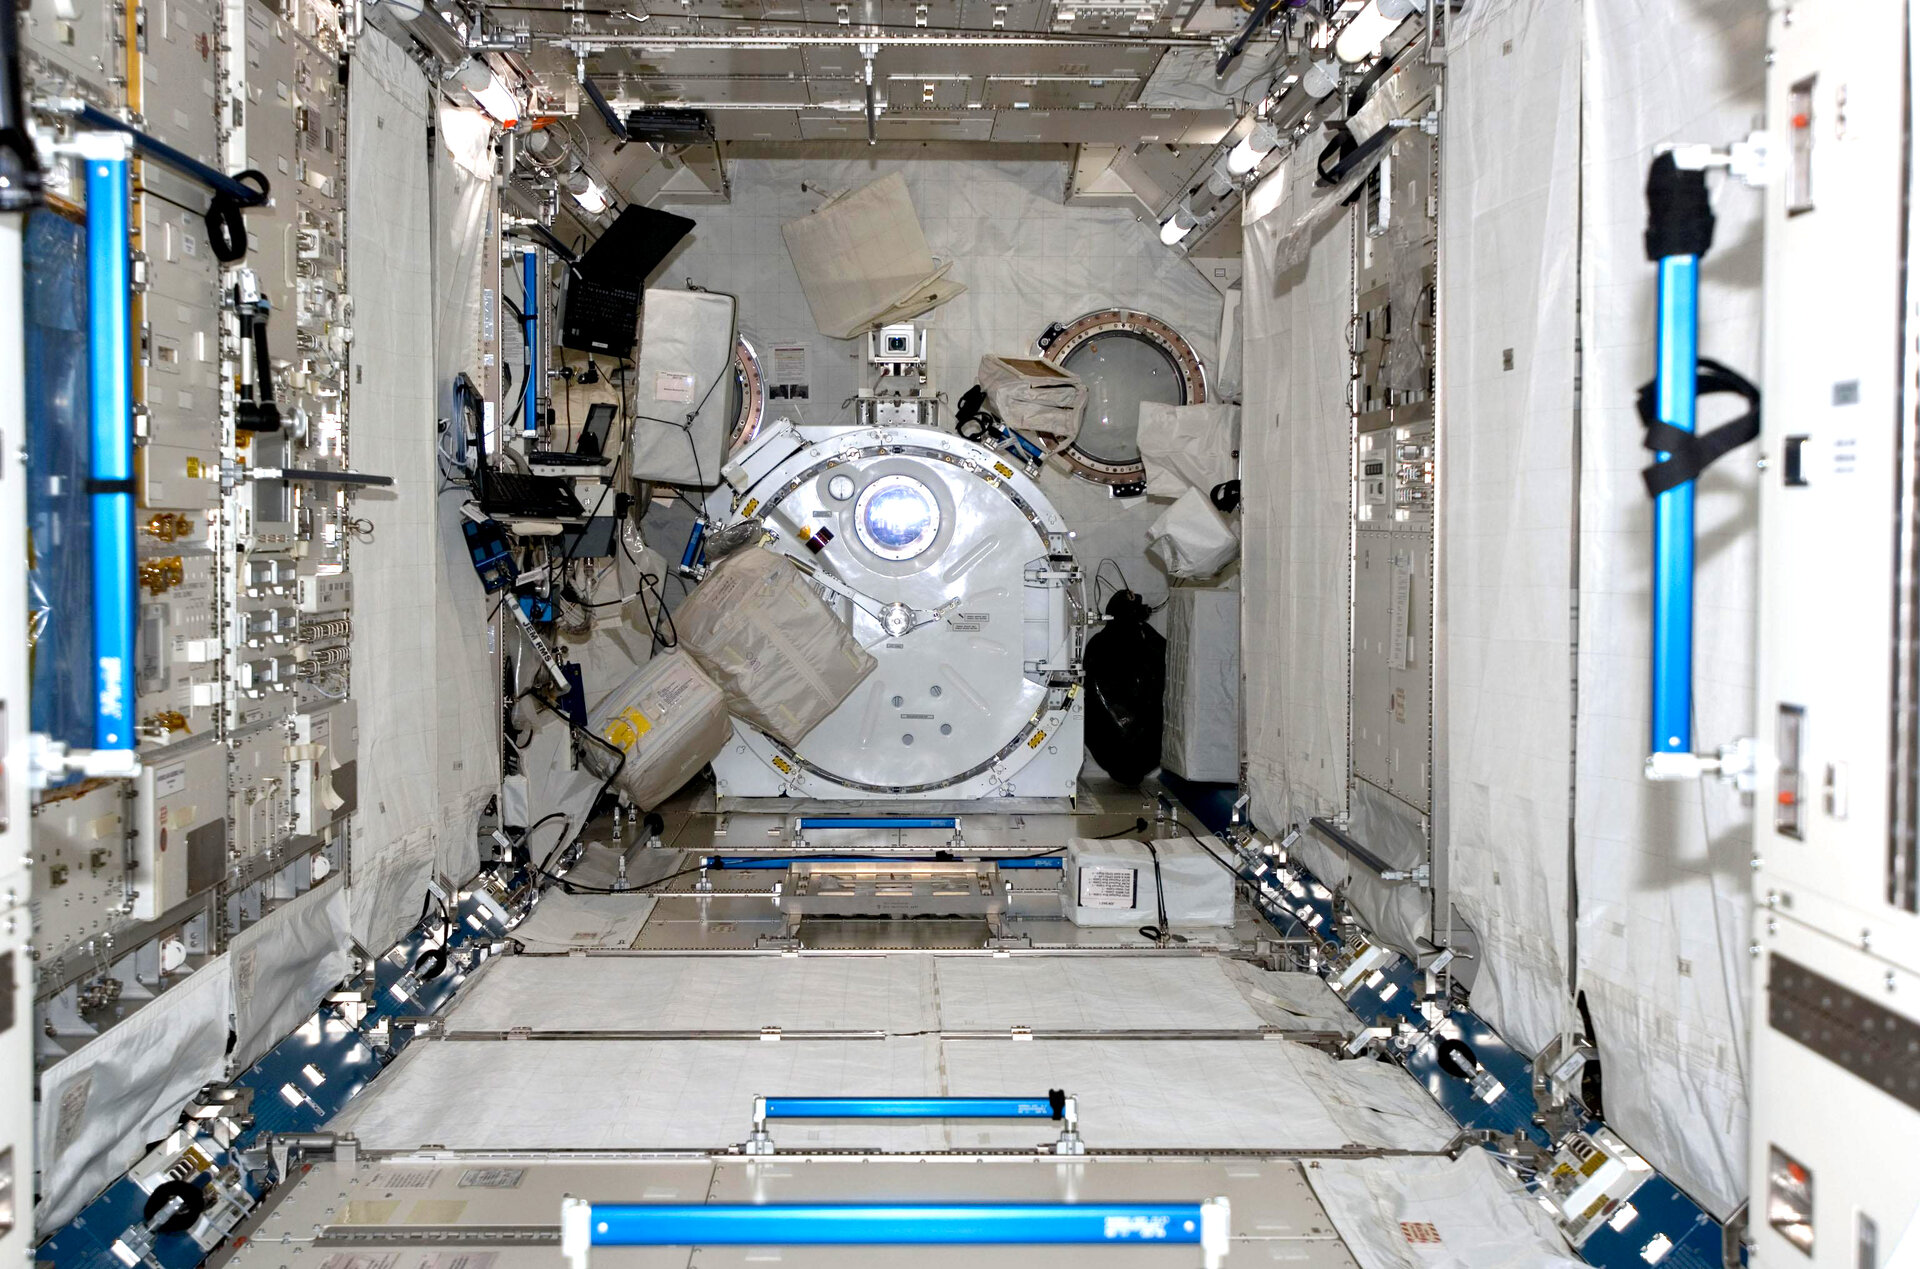 Interior Japanese Experiment Module (Kibo) after installation during STS-124